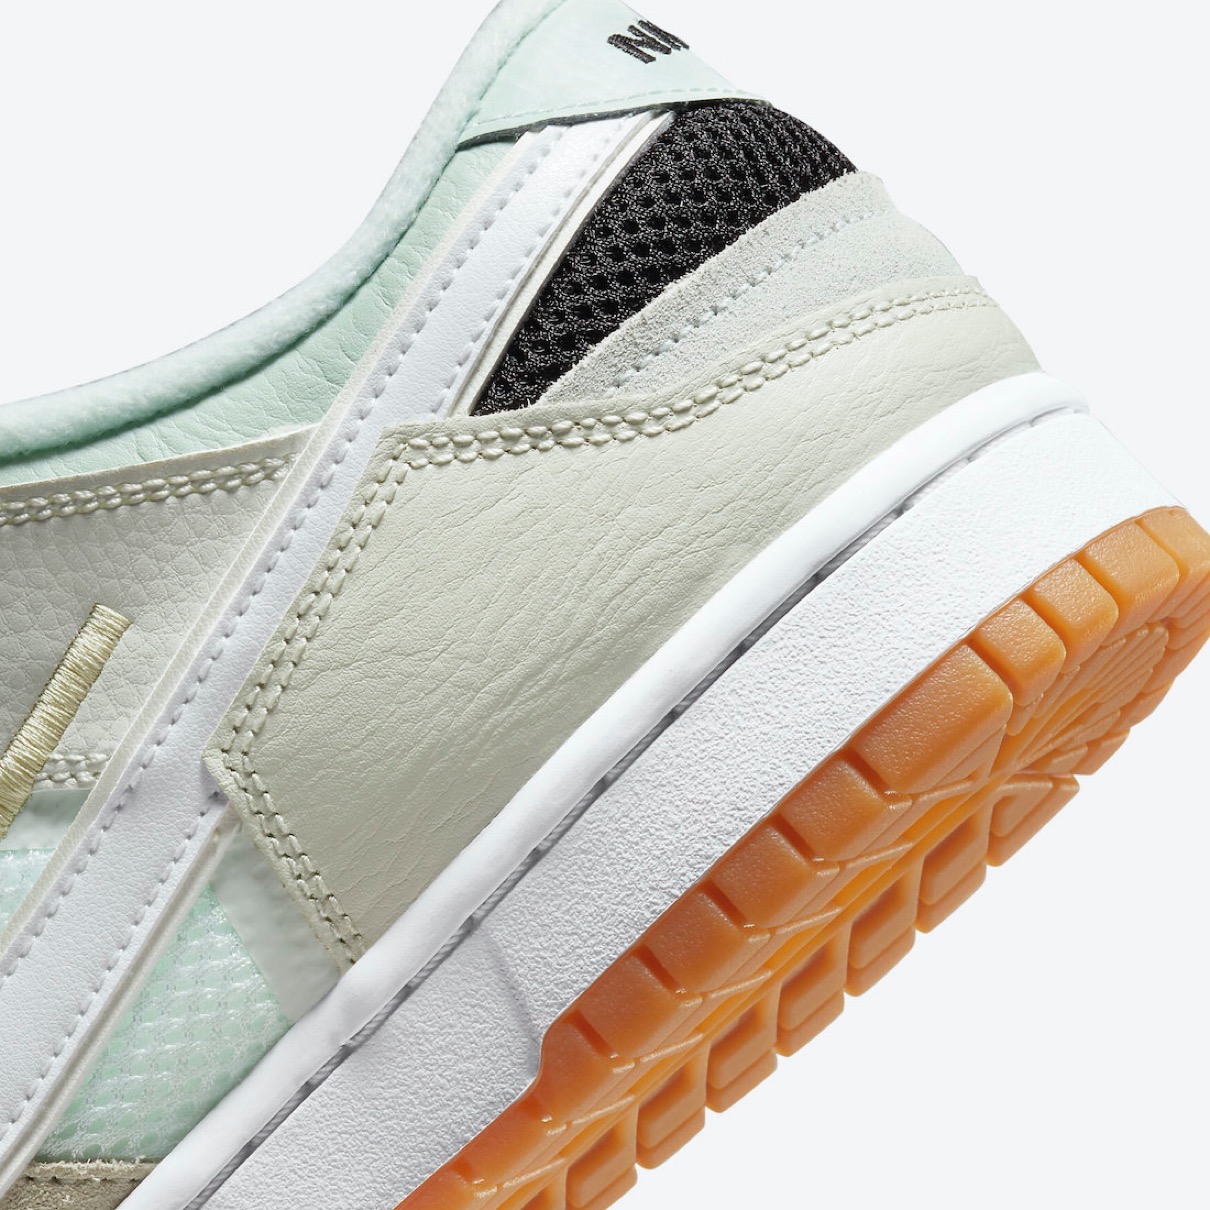 Nike】Dunk Low Scrap “Seaglass”が国内8月26日に発売予定 | UP TO DATE